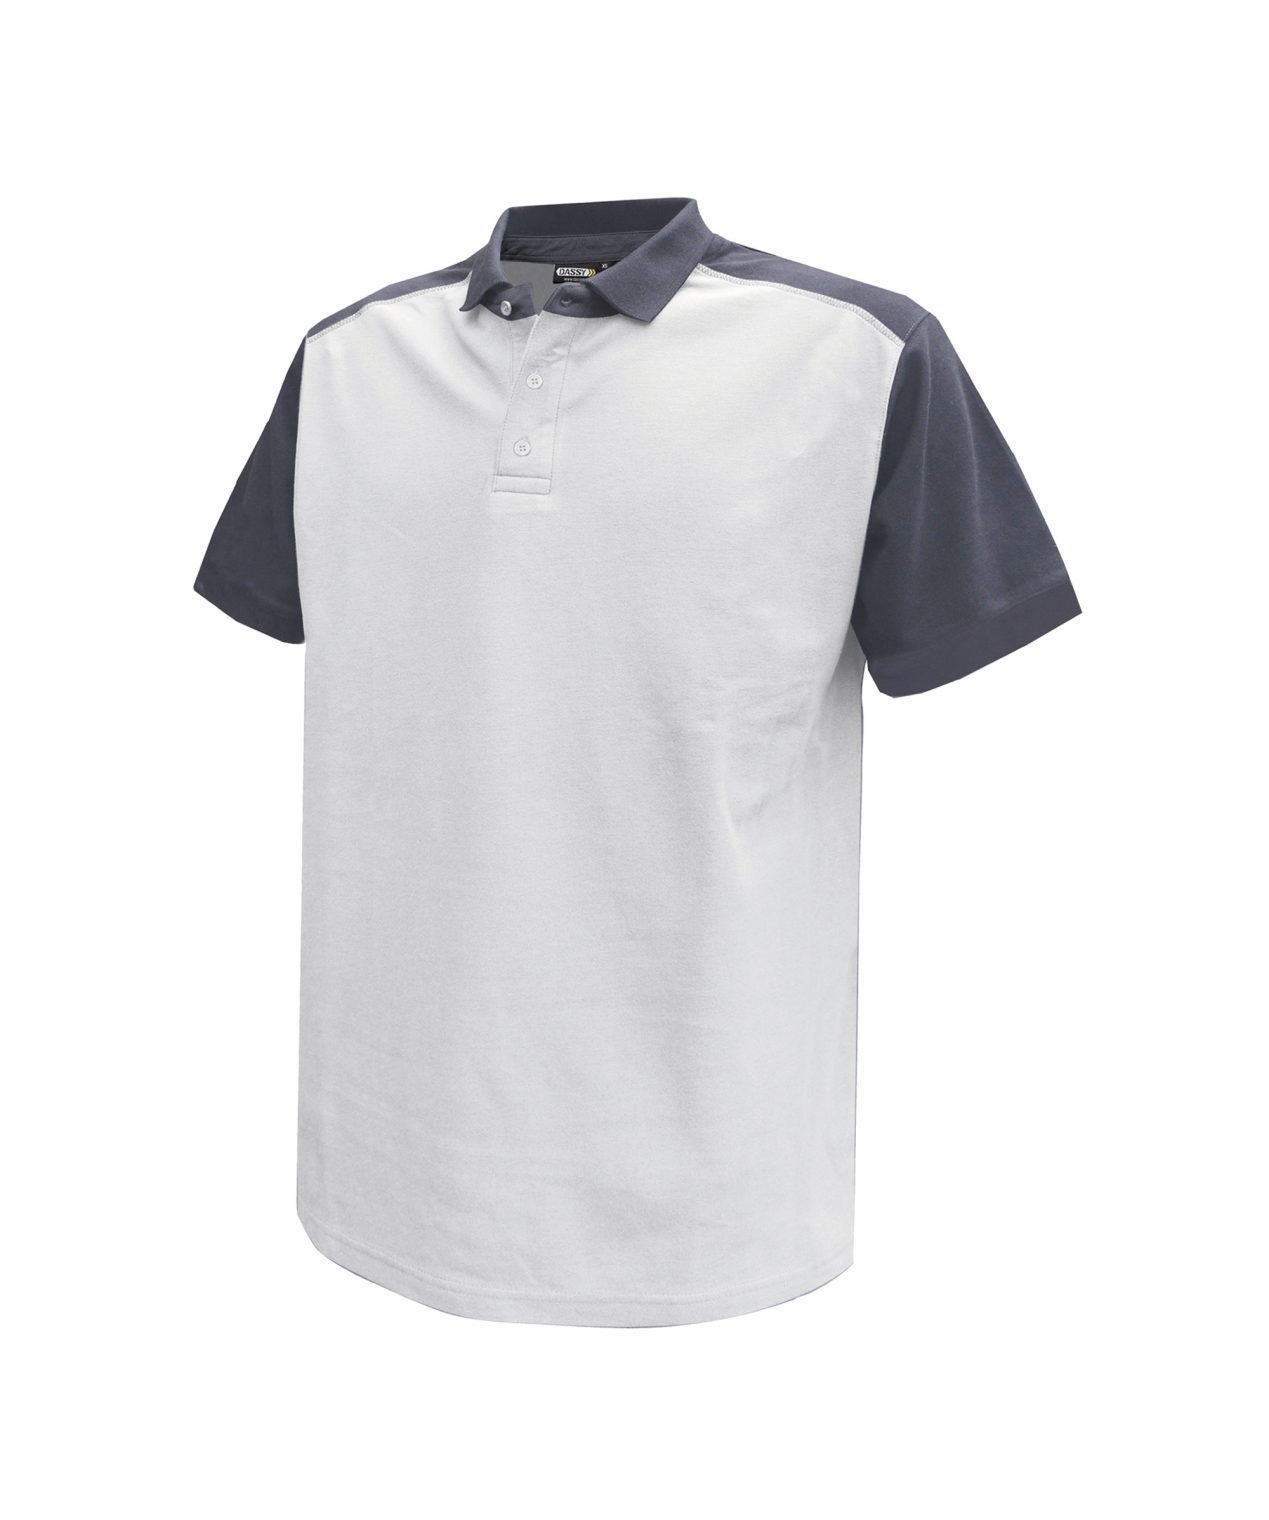 cesar two tone polo shirt white cement grey front